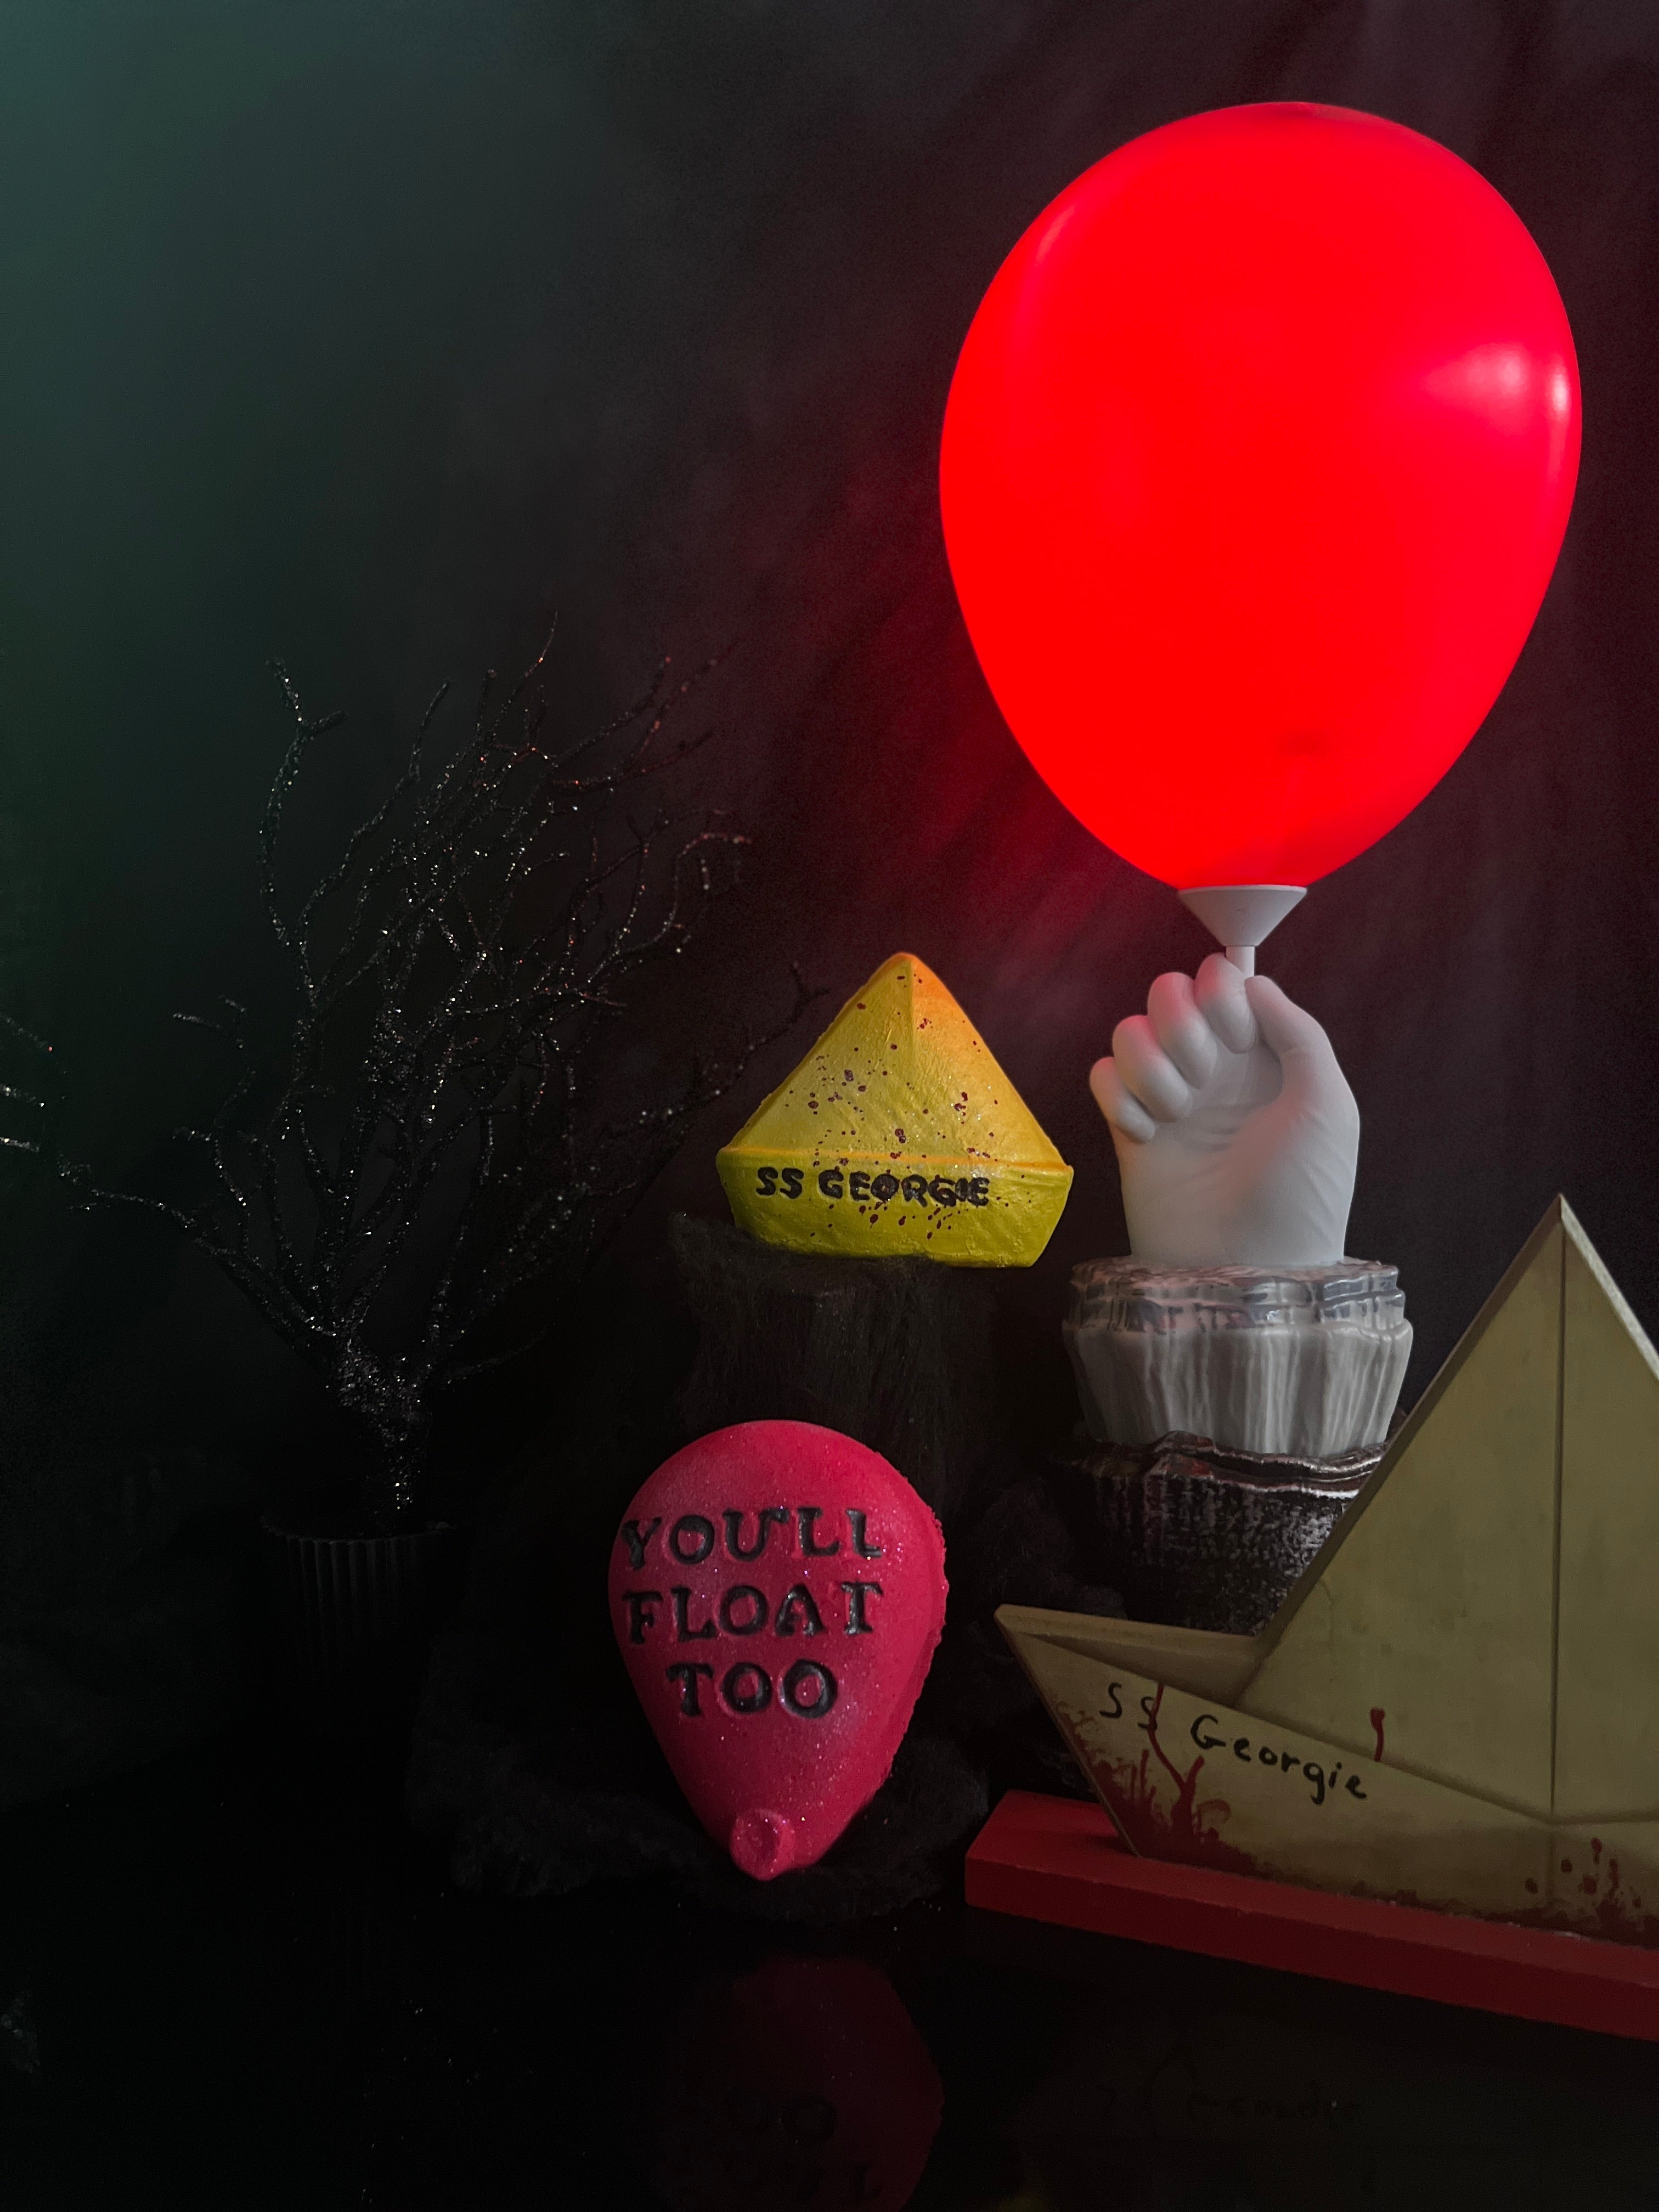 one red  balloon bath bomb and one yellow boat shaped bath bomb with image of red balloon and boat as props in the background